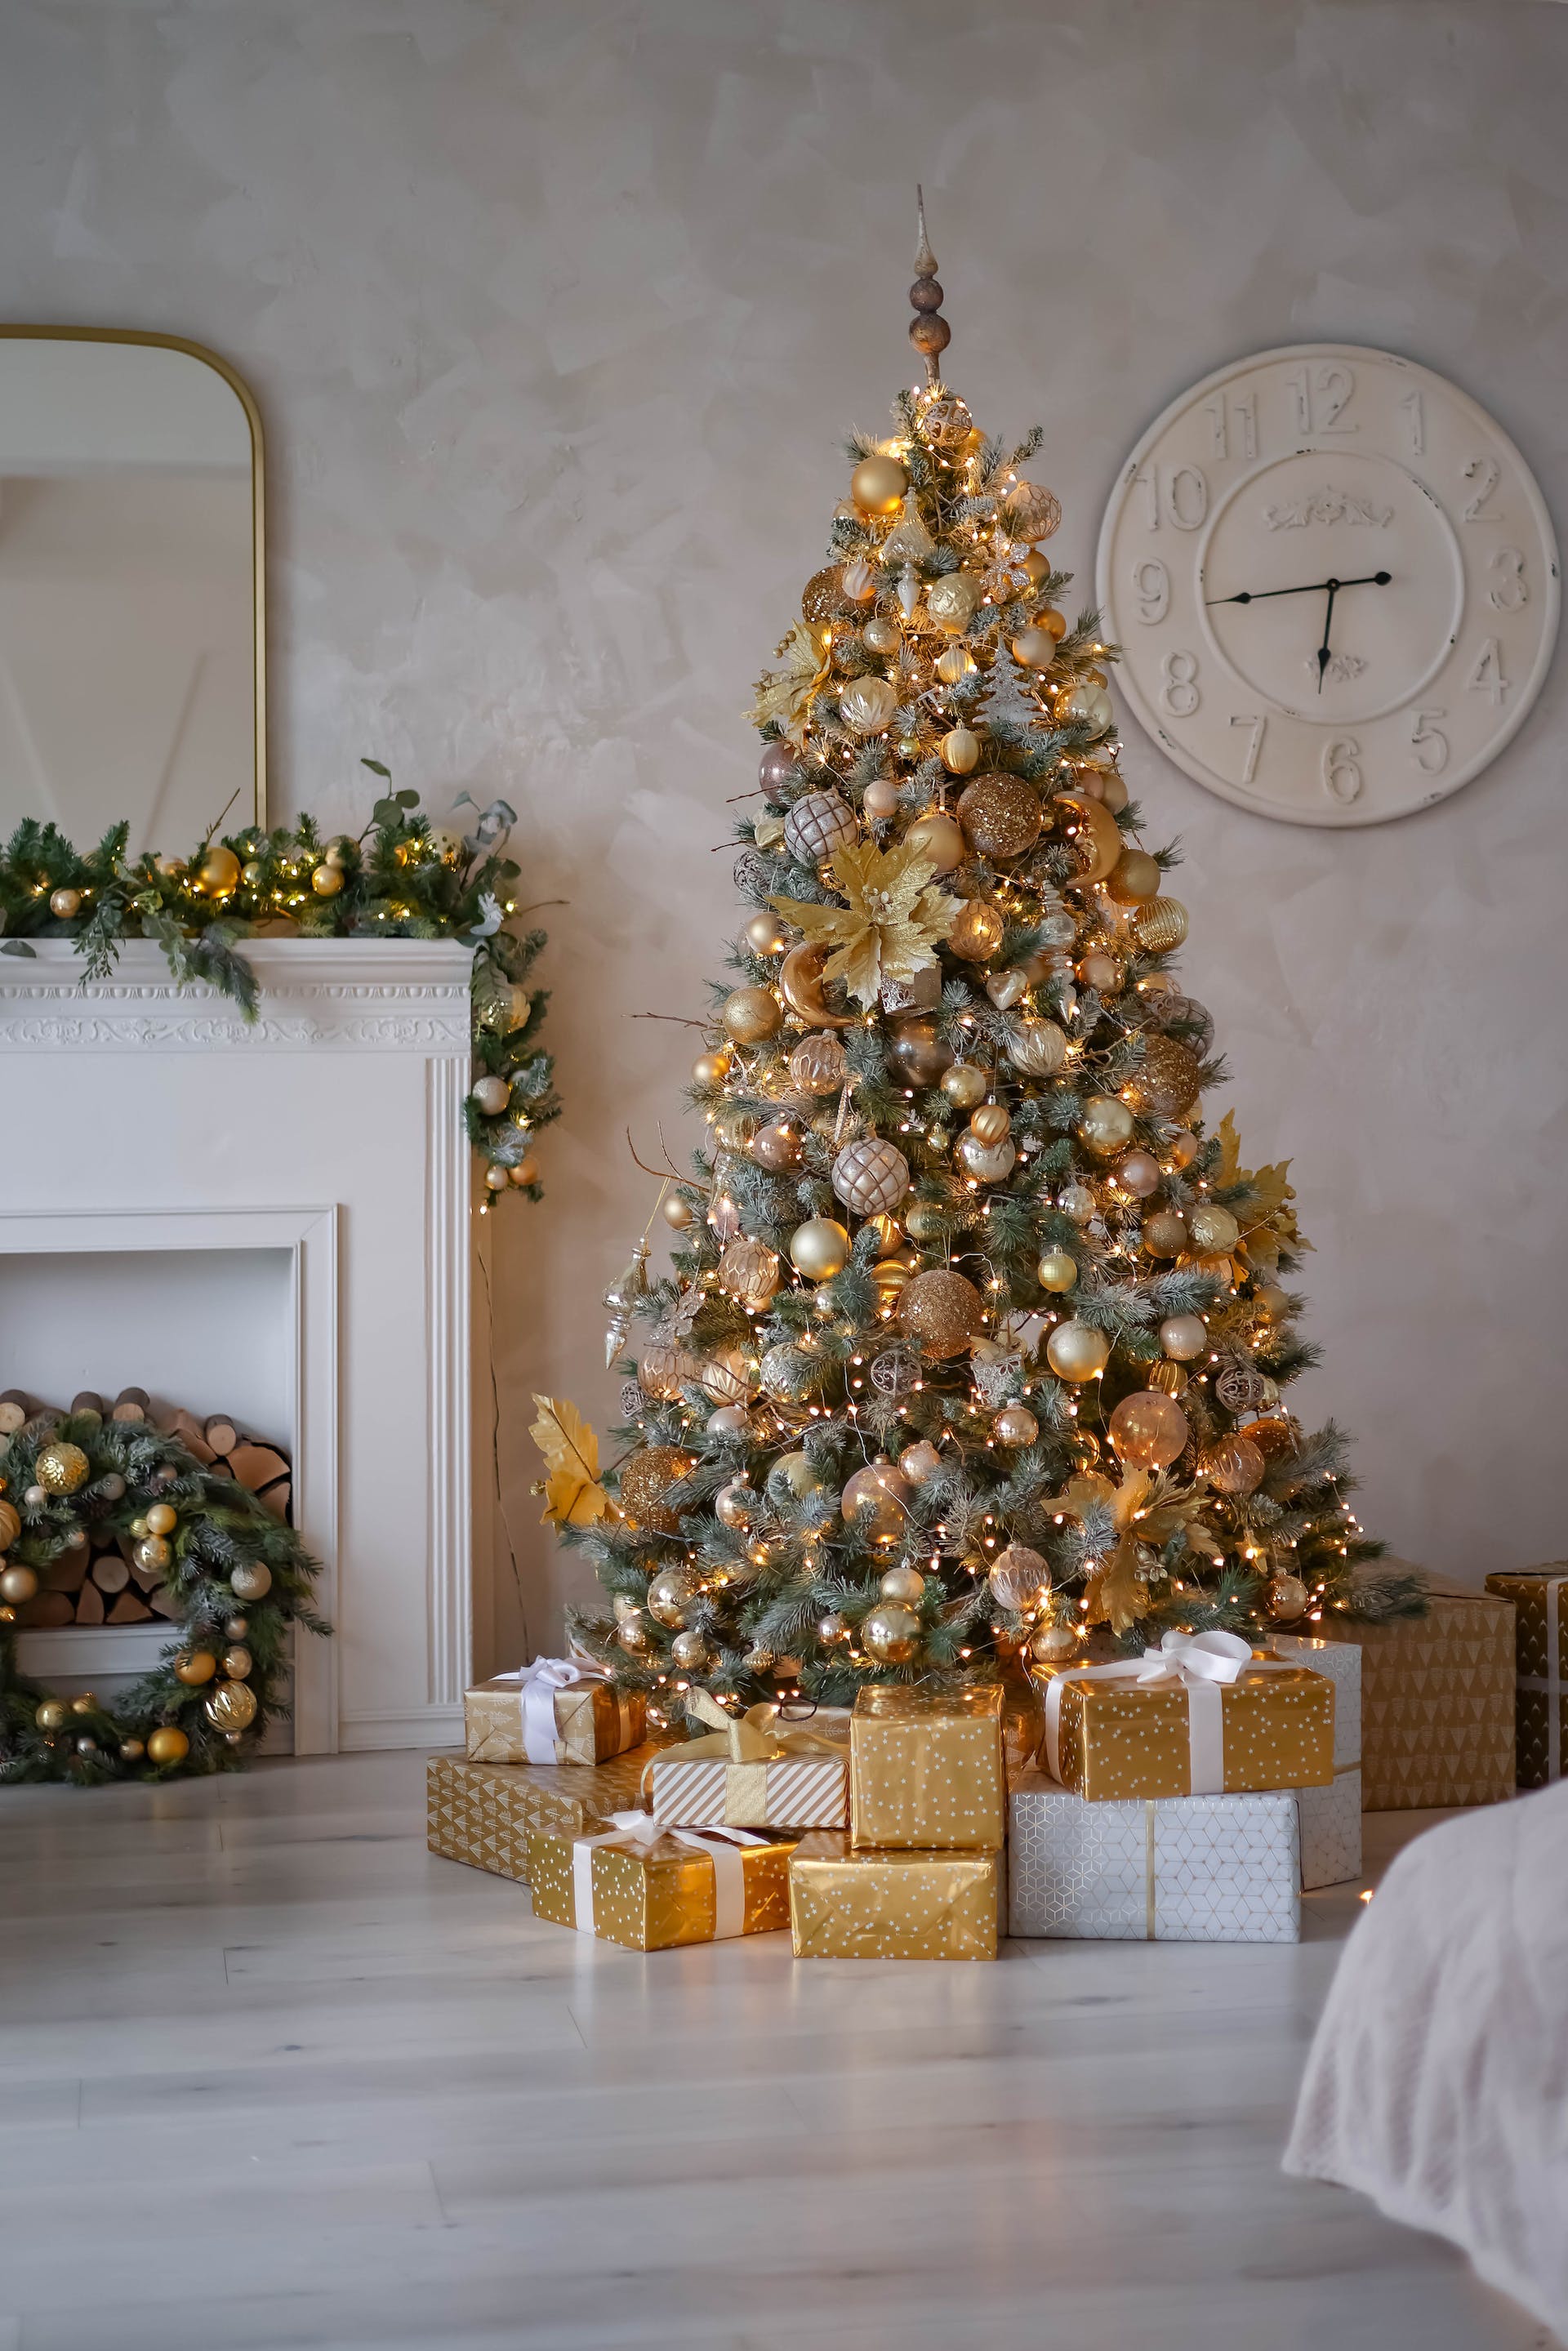 A Christmas tree with gifts | Source: Pexels